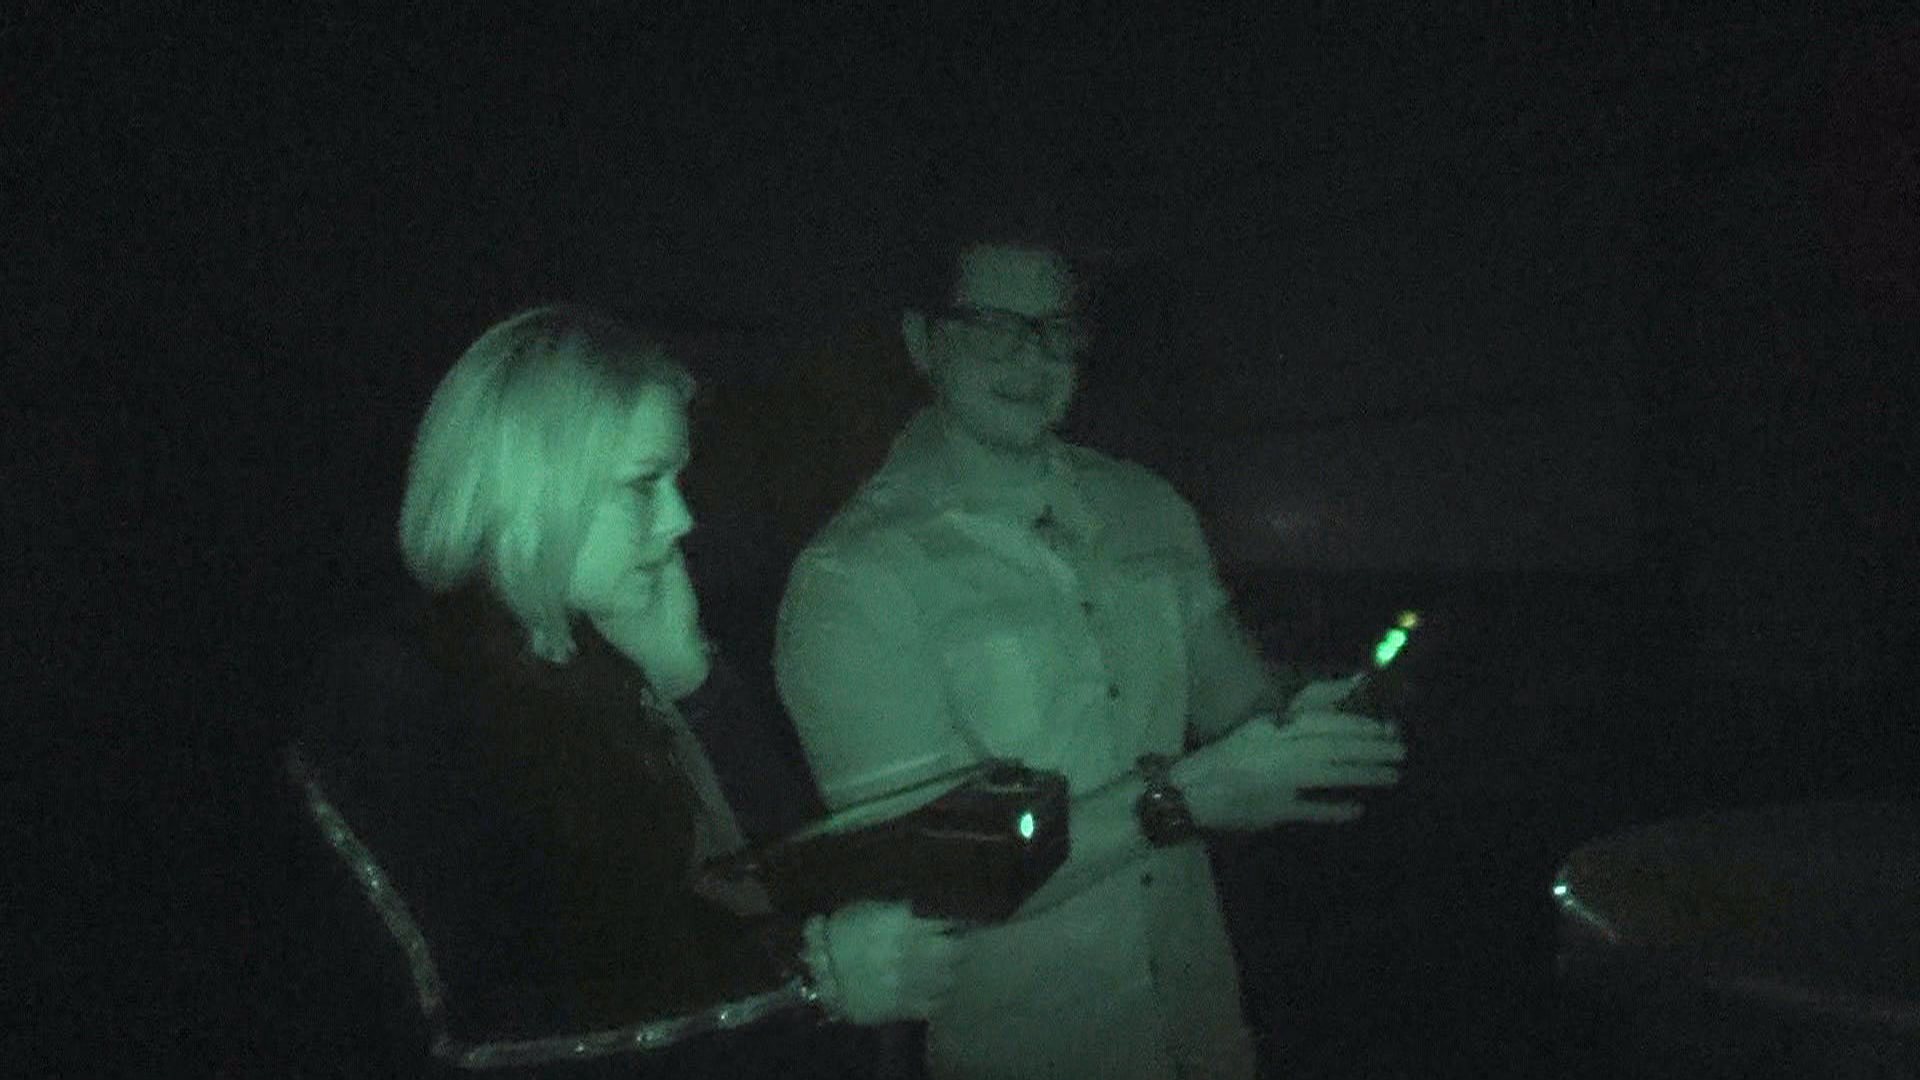 Today's Dylan Dreyer Goes On A Spooky Ghost Adventure - Darkness , HD Wallpaper & Backgrounds